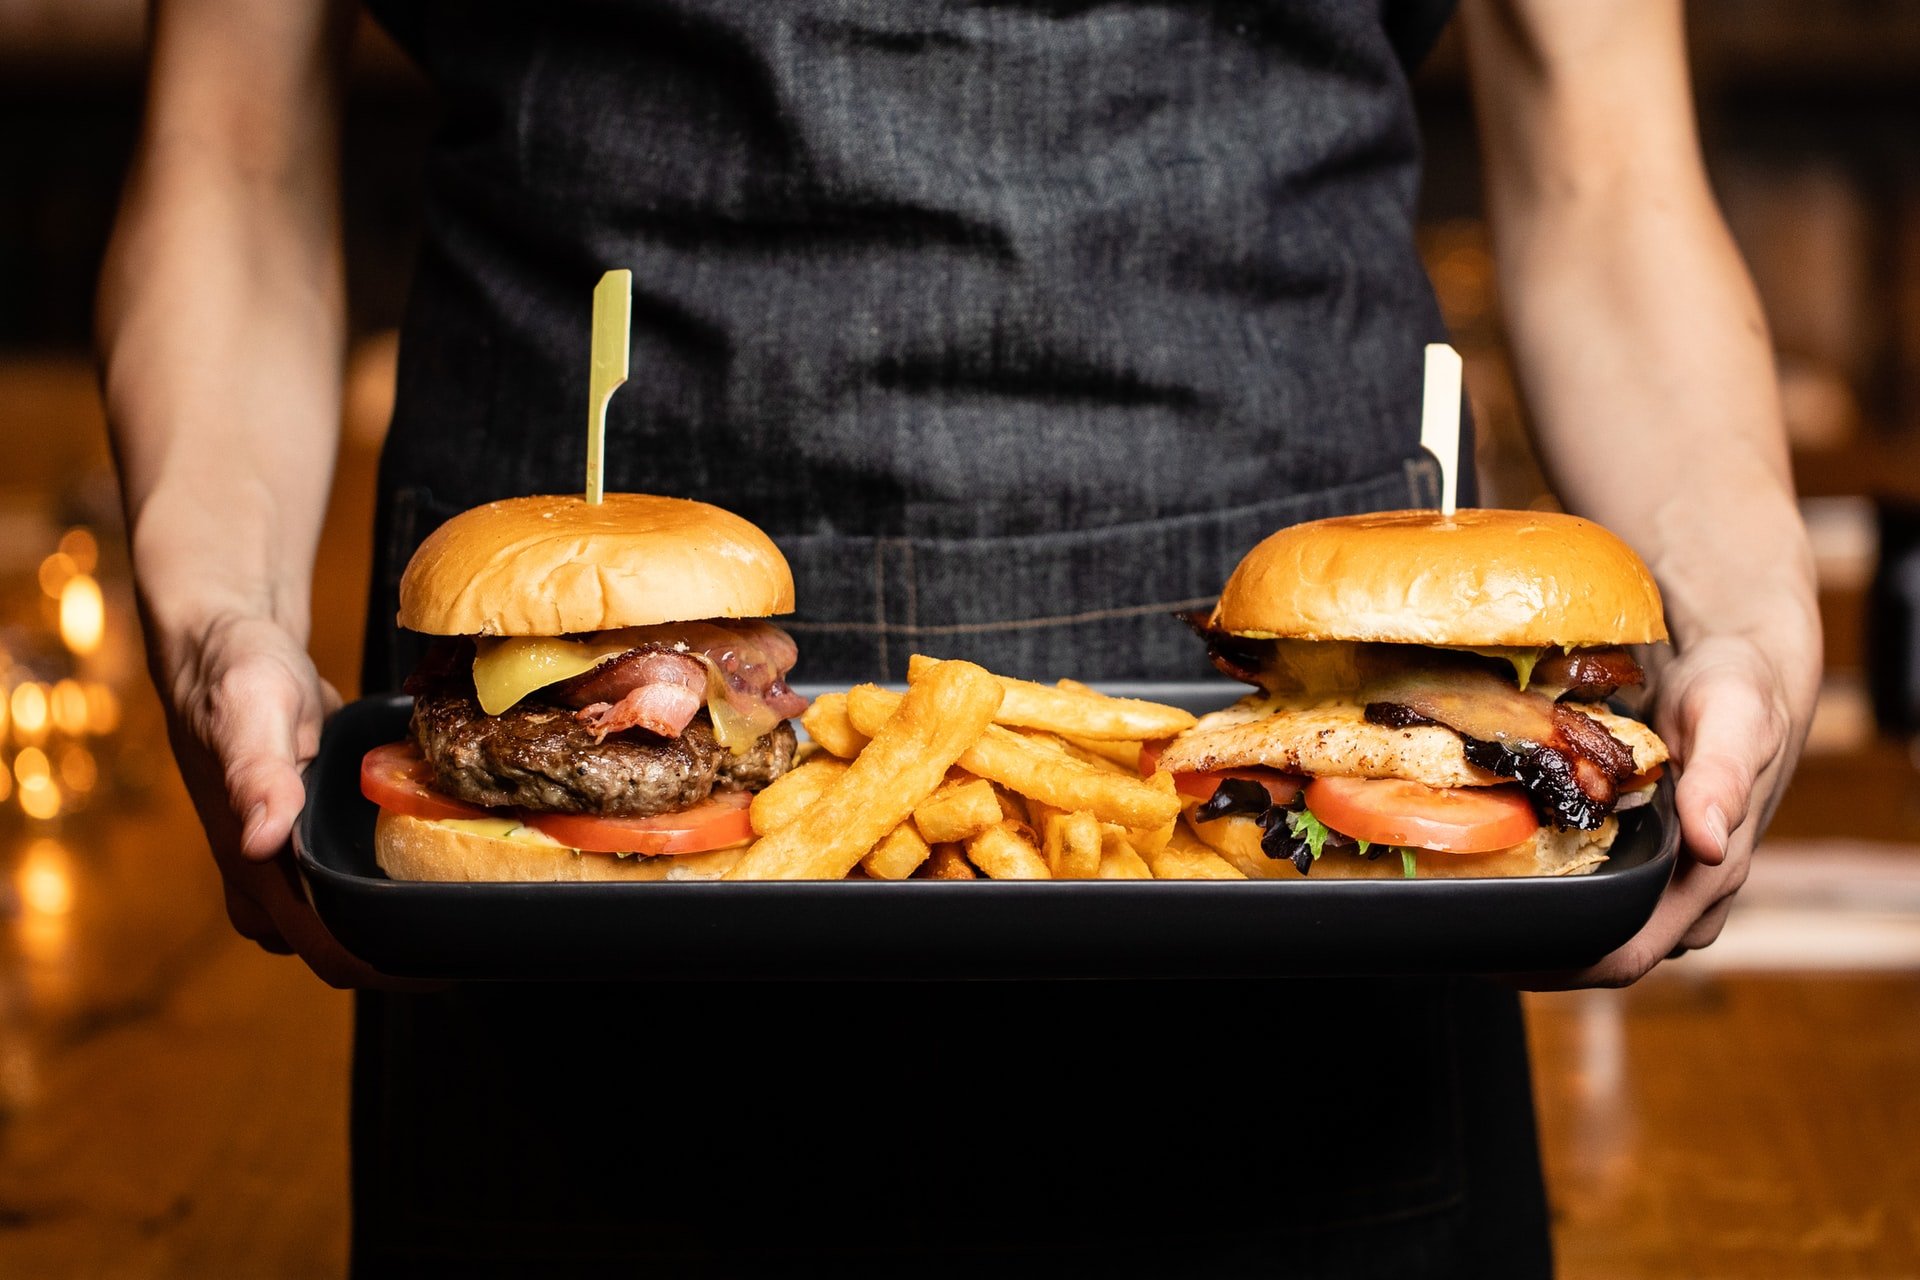 Burgers and fries on a tray being held by a person | Spyglass Realty